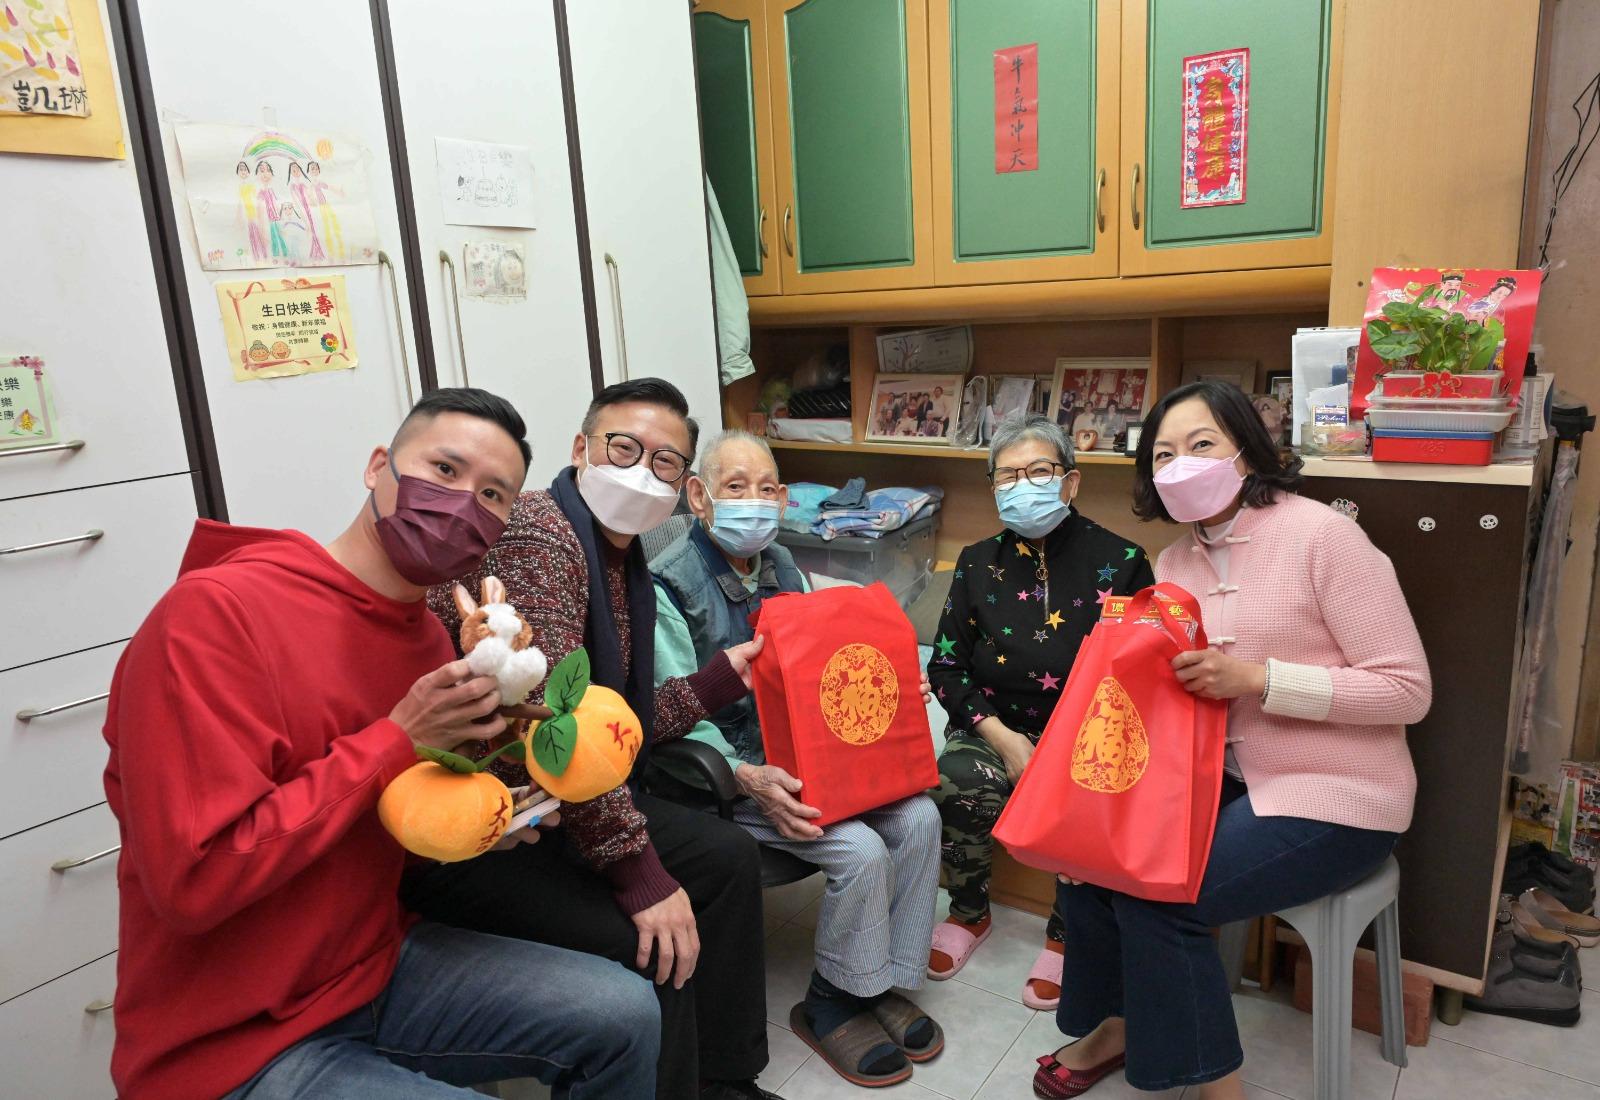 The Deputy Secretary for Justice, Mr Cheung Kwok-kwan, together with a number of the Principal Officials today (January 23) visited grass-roots families in Wong Tai Sin District to distribute blessing bags and celebrate Chinese New Year with them. Photo shows Mr Cheung (second left), together with the Secretary for Home and Youth Affairs, Miss Alice Mak (first right), visiting the elderly doubleton living in Lok Fu Estate, Wong Tai Sin, to learn more about their daily life and needs; as well as presenting gifts to the seniors and extending seasonal greetings to them on behalf of the Government. Next to them is the District Officer (Wong Tai Sin), Mr Steve Wong (first left).